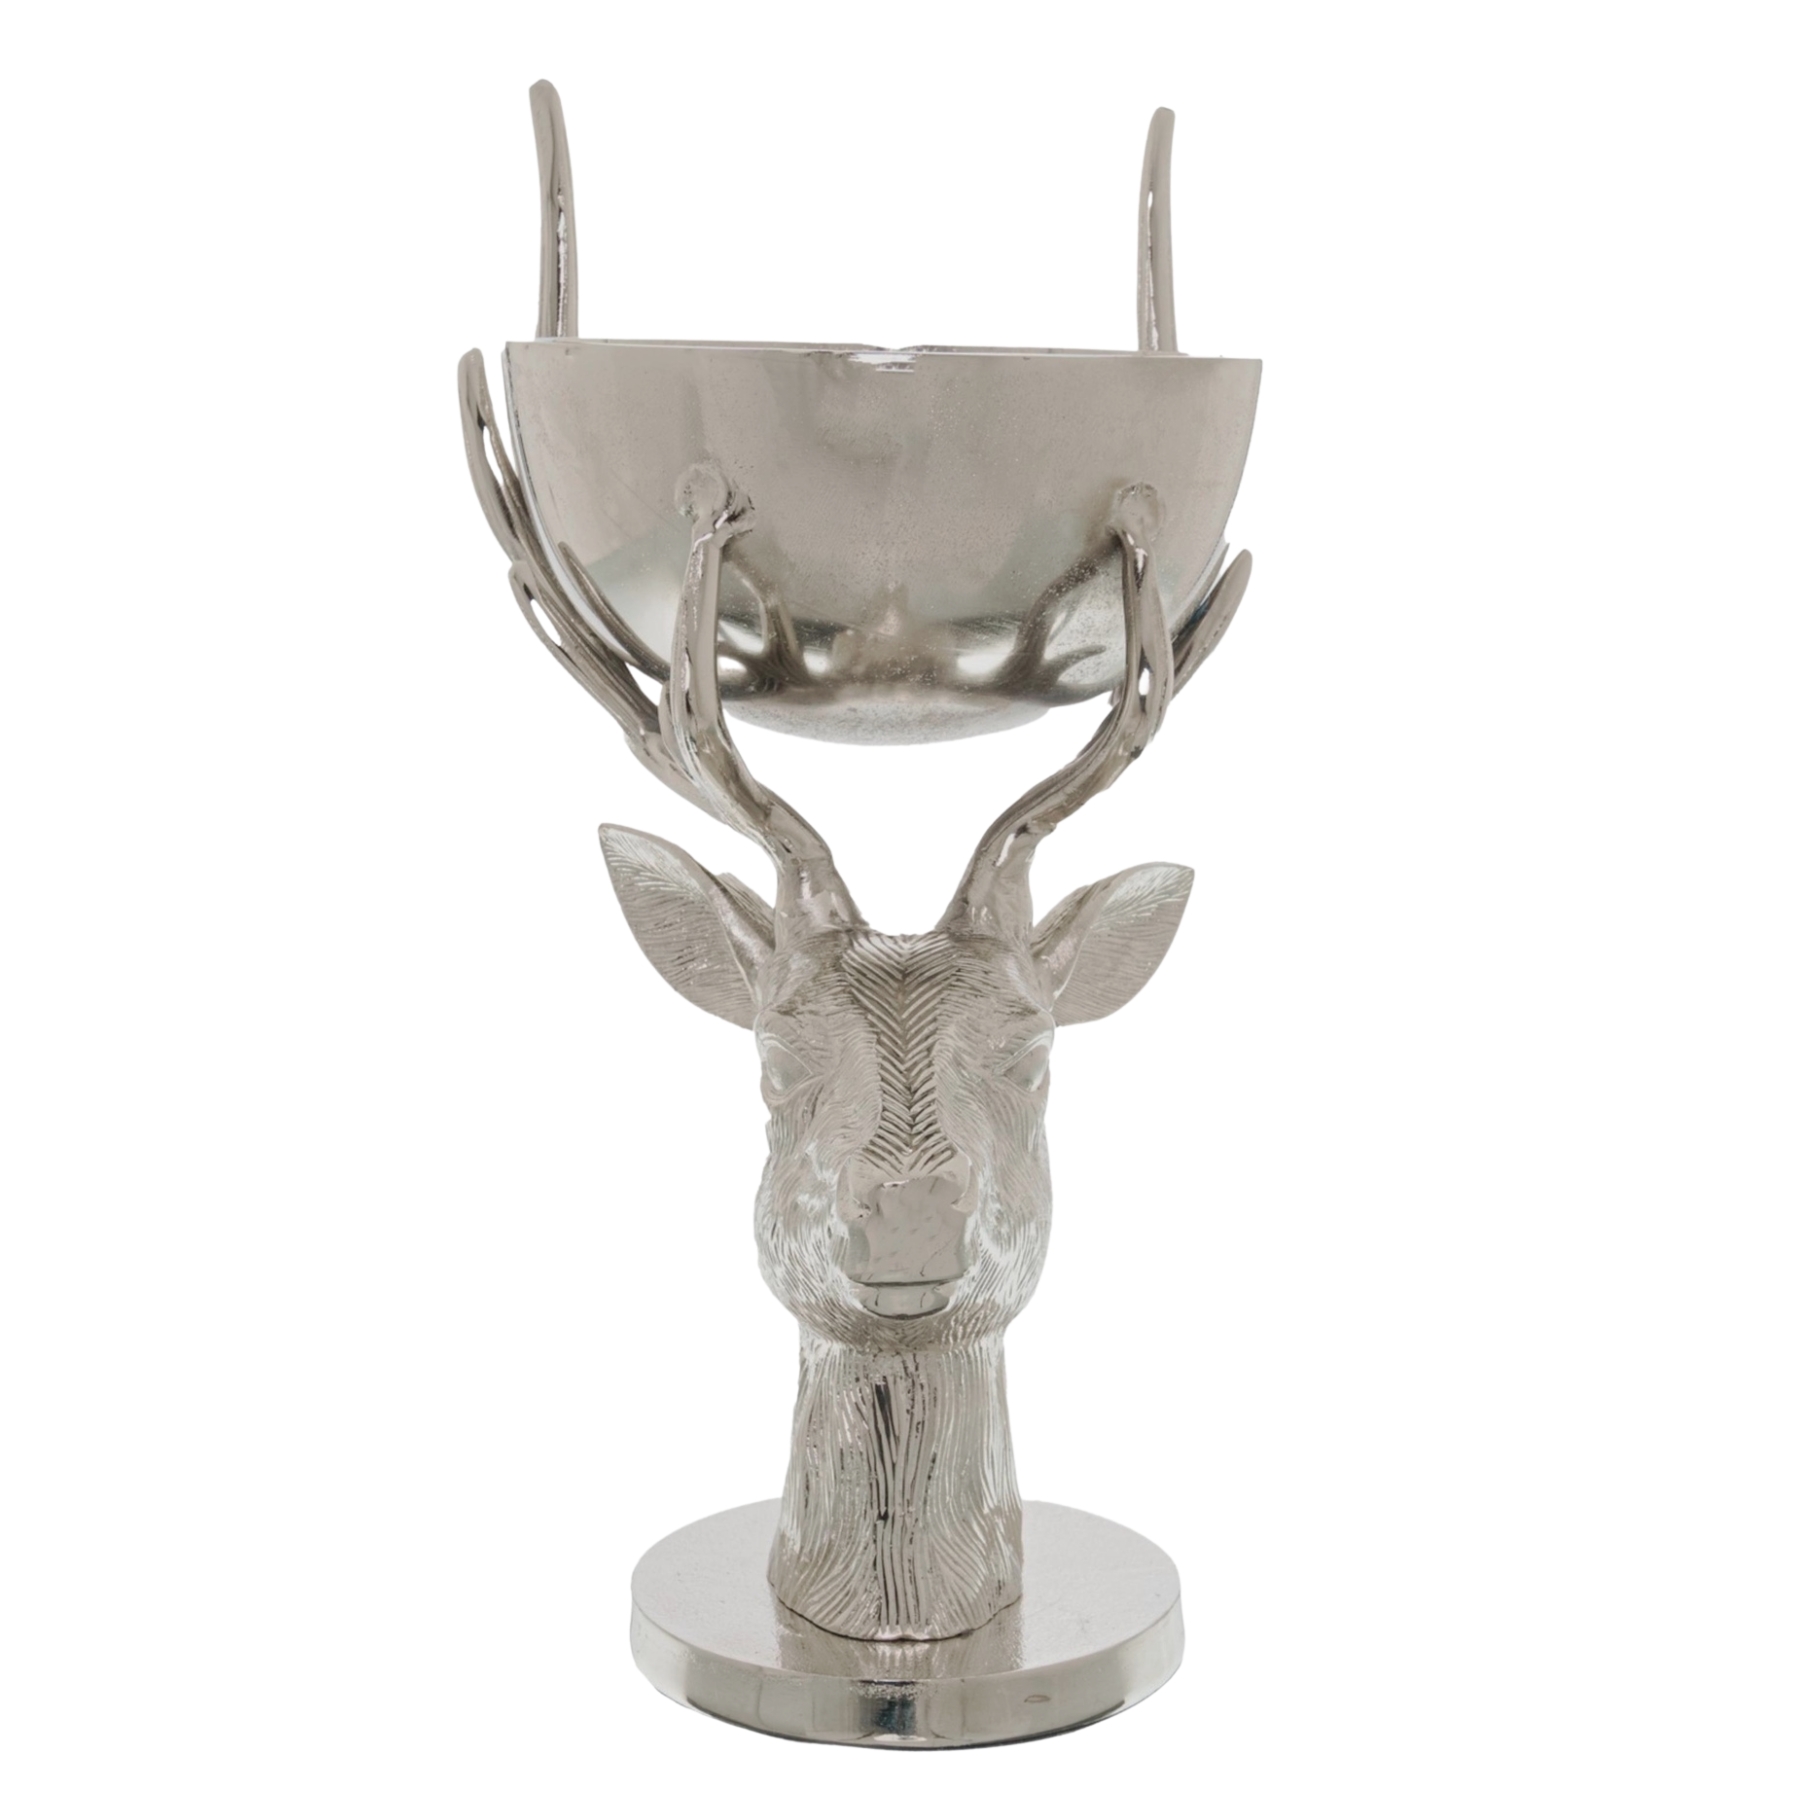 Silver Stag Bowl Ornament - Image 1